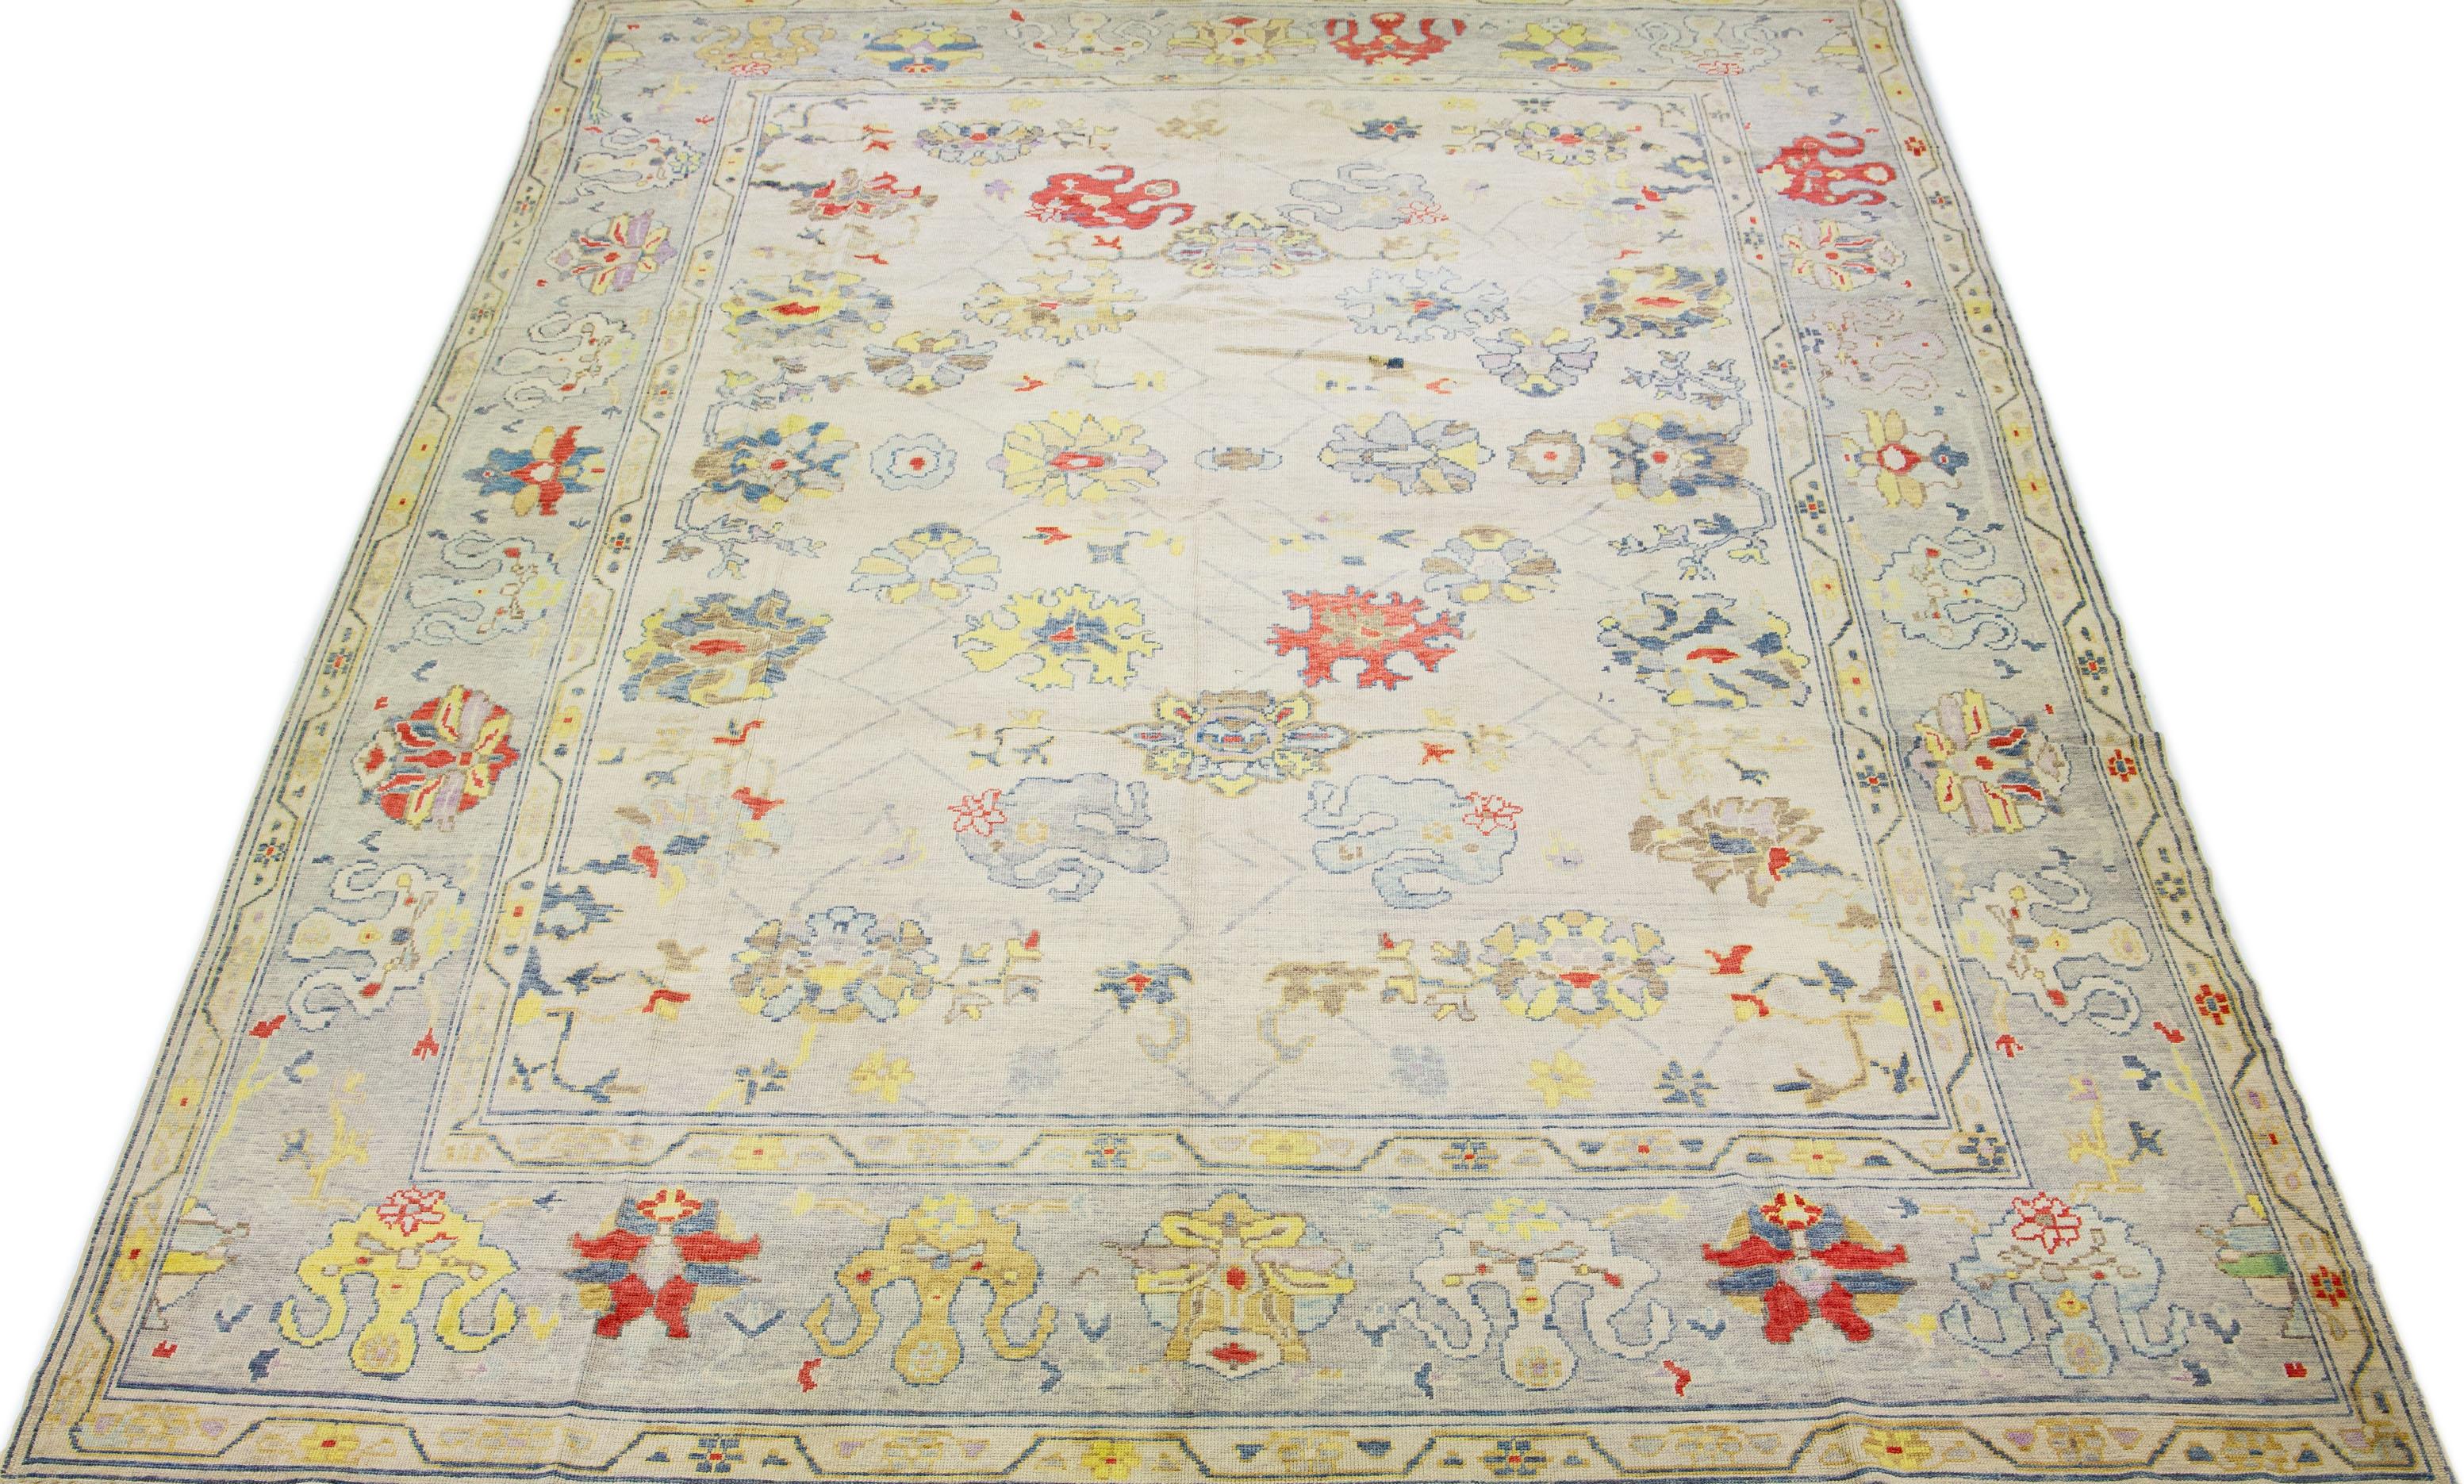 Elevate your interior space with the exquisite beauty of this flawless Turkish Oushak wool rug. This rug exudes pure luxury and refinement and is imbued with superior artistry and craftsmanship. Meticulously hand-knotted to perfection, its